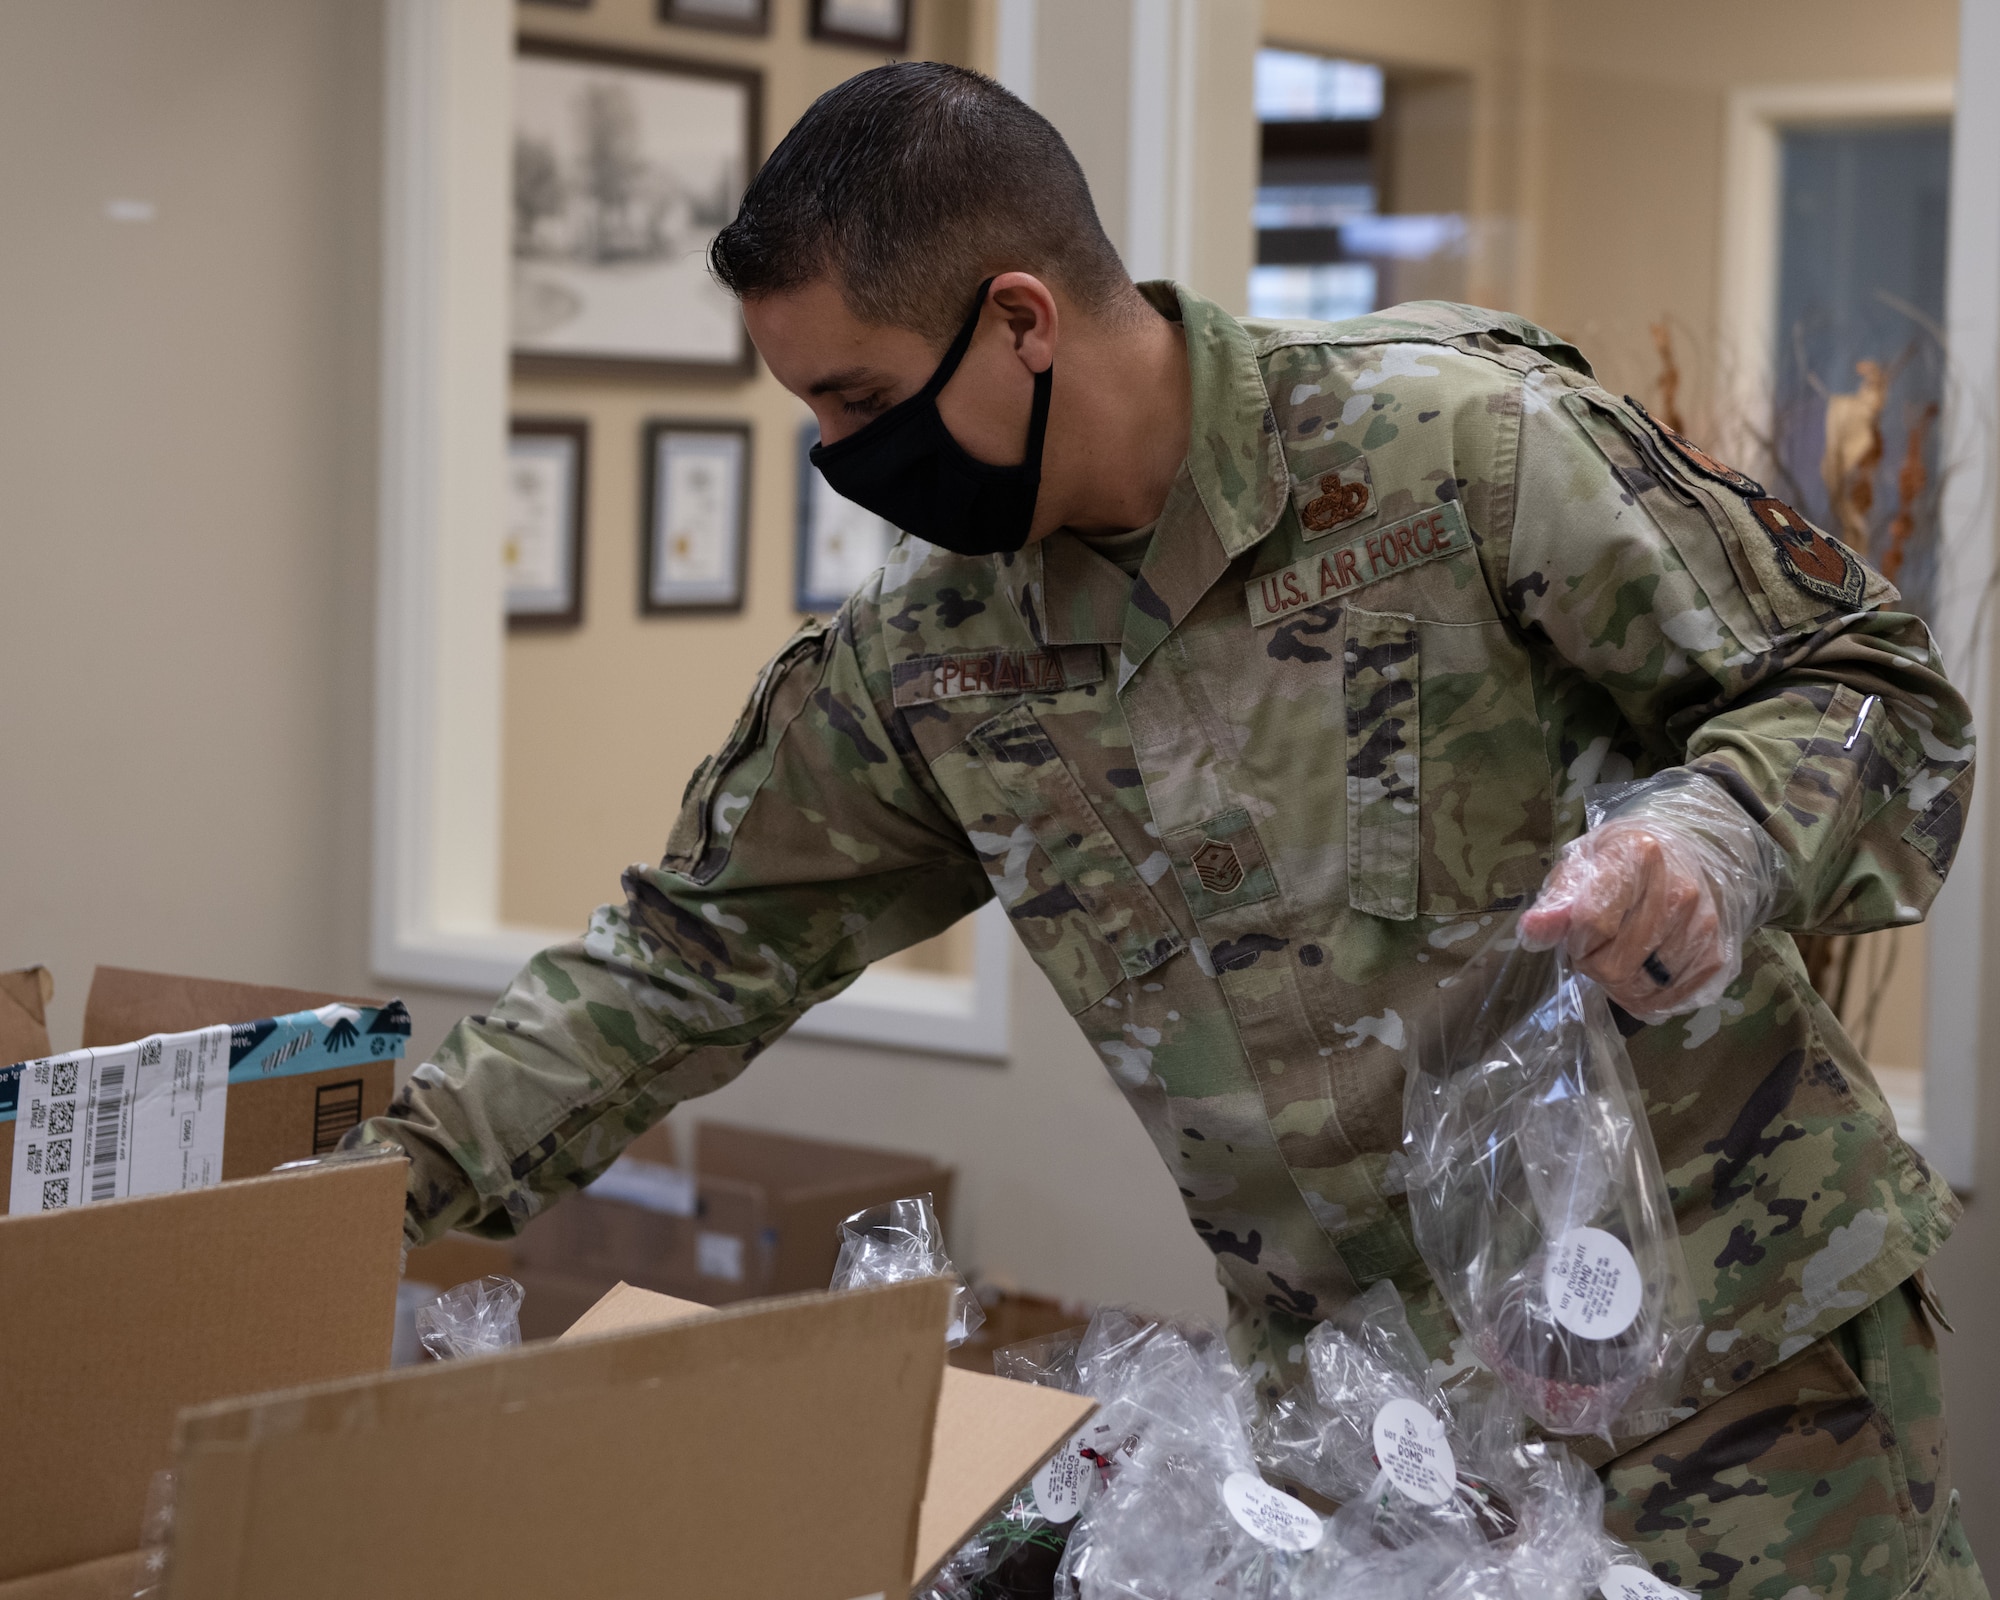 Master Sgt. Roberto Peralta, Jeanne M. Holm Center for Officer Accessions and Citizen Development first sergeant places baked goods into bags for Airmen Dec. 16, 2020, at the Hunt Housing Offices on Maxwell Air Force Base, Alabama. Volunteers repackaged donated cookies and other baked goods while wearing masks and gloves to reduce the risk of COVID-19 transmission.